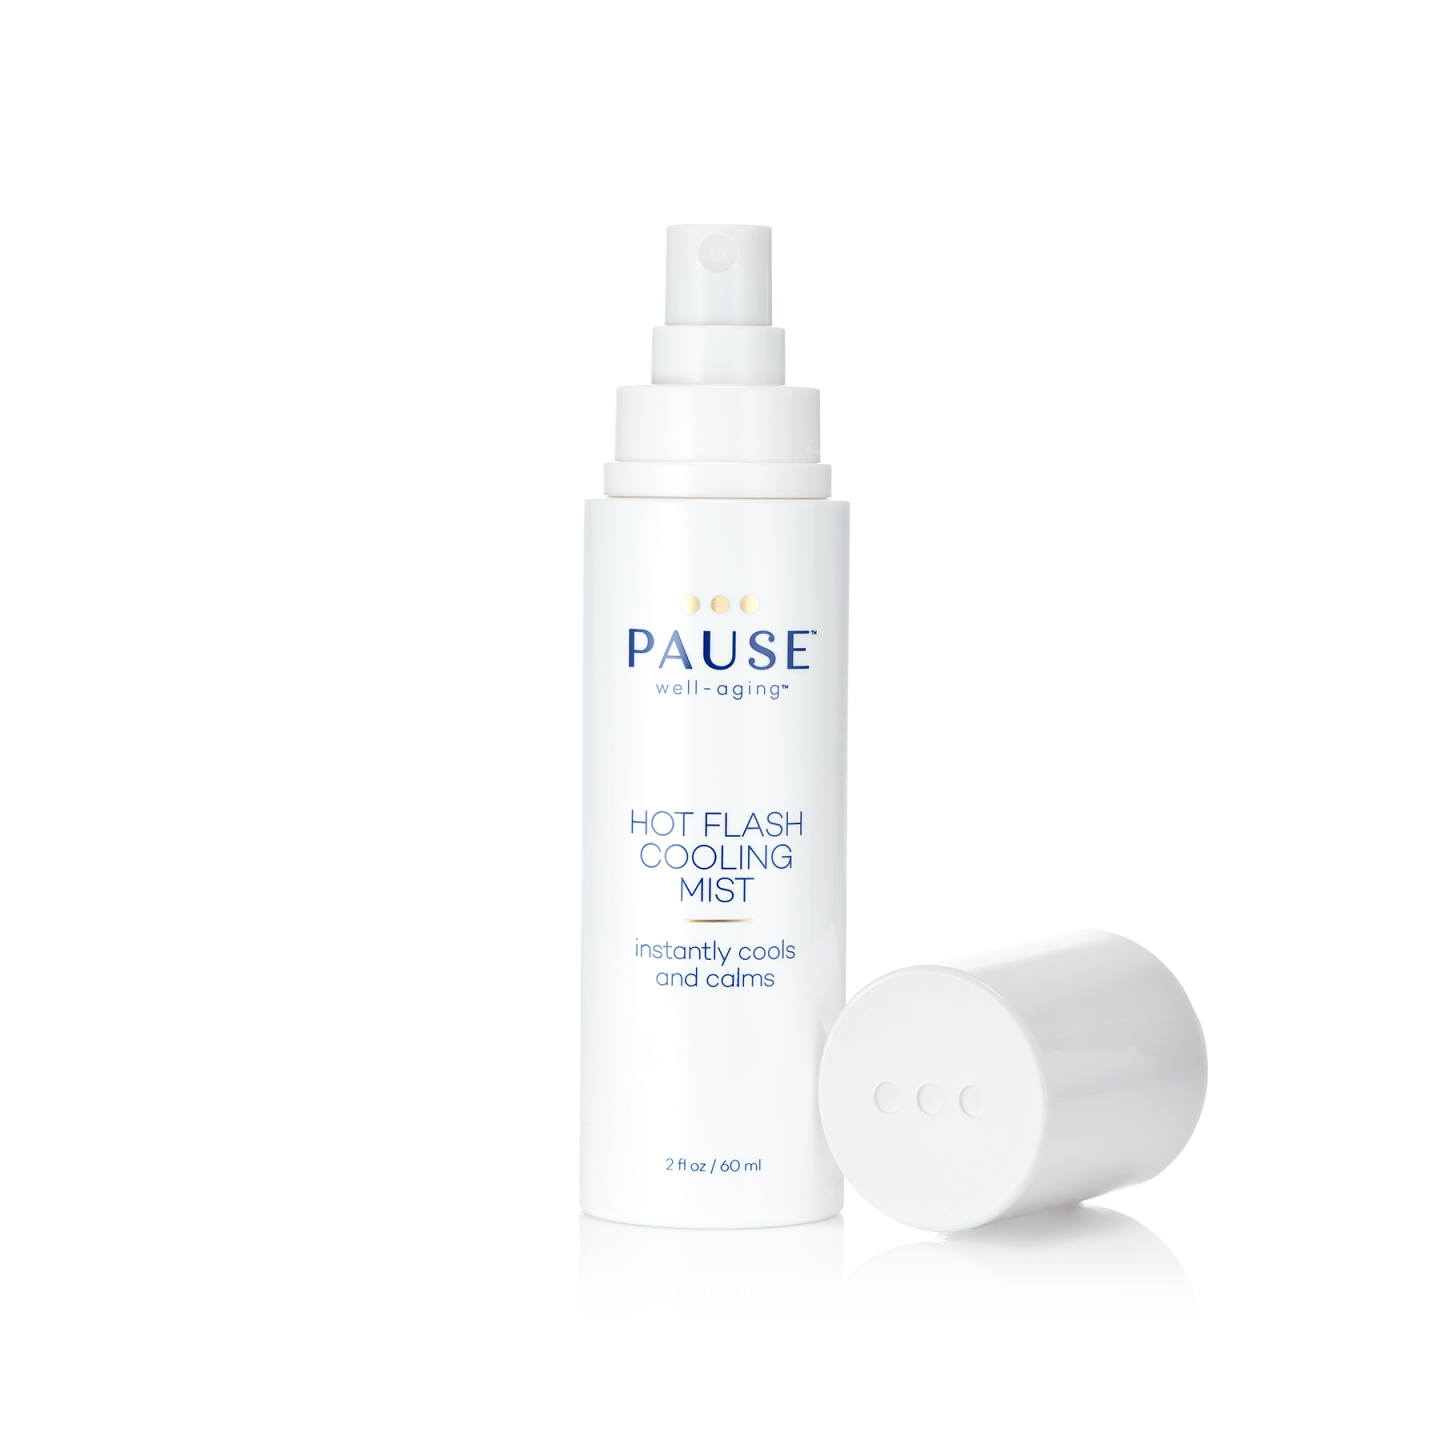 Pause hot flash cooling mist